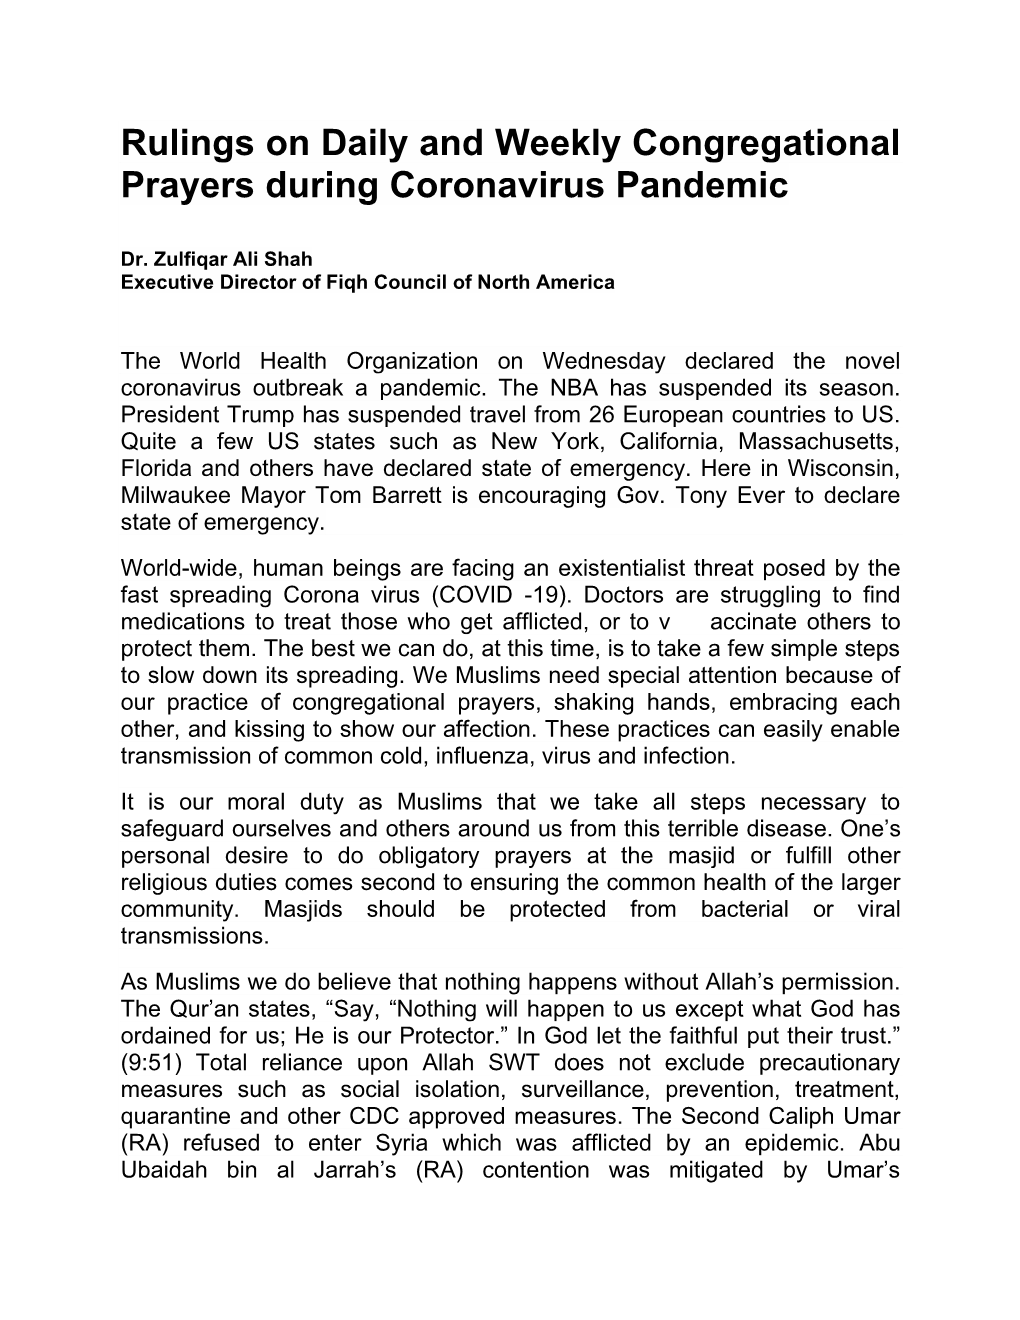 Rulings on Daily and Weekly Congregational Prayers During Coronavirus Pandemic